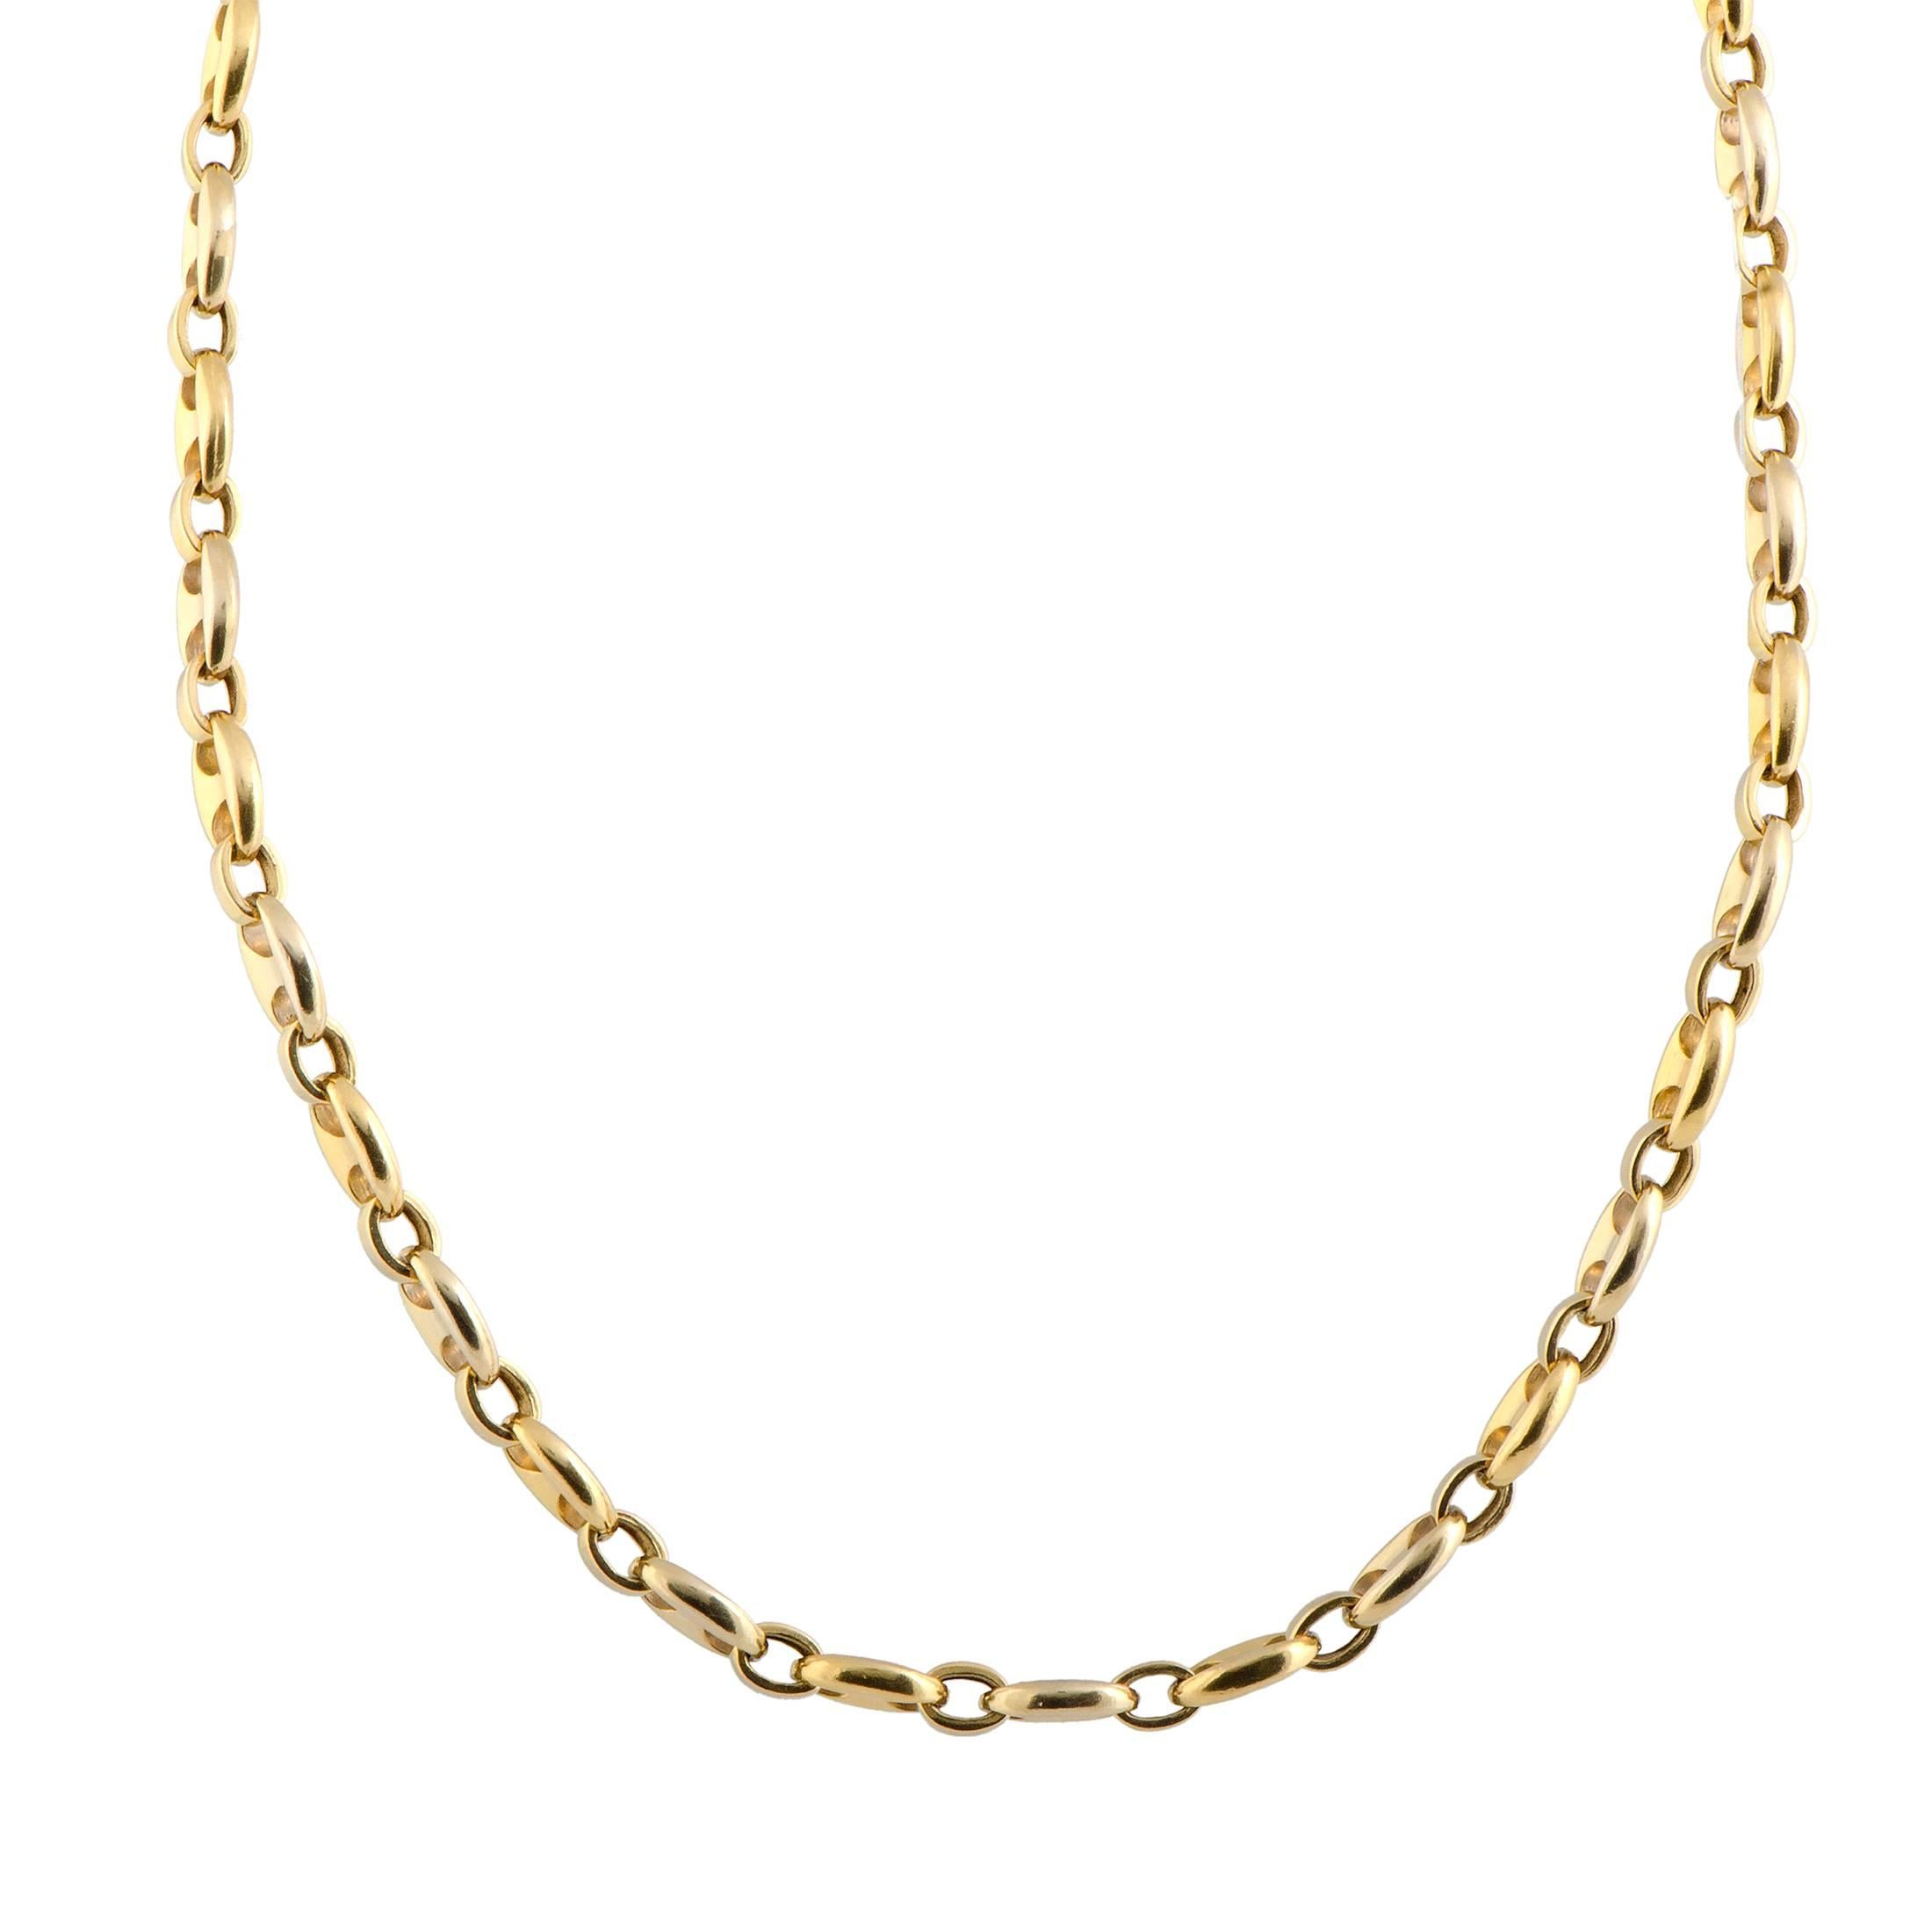 Cartier Yellow Gold Chain Necklace